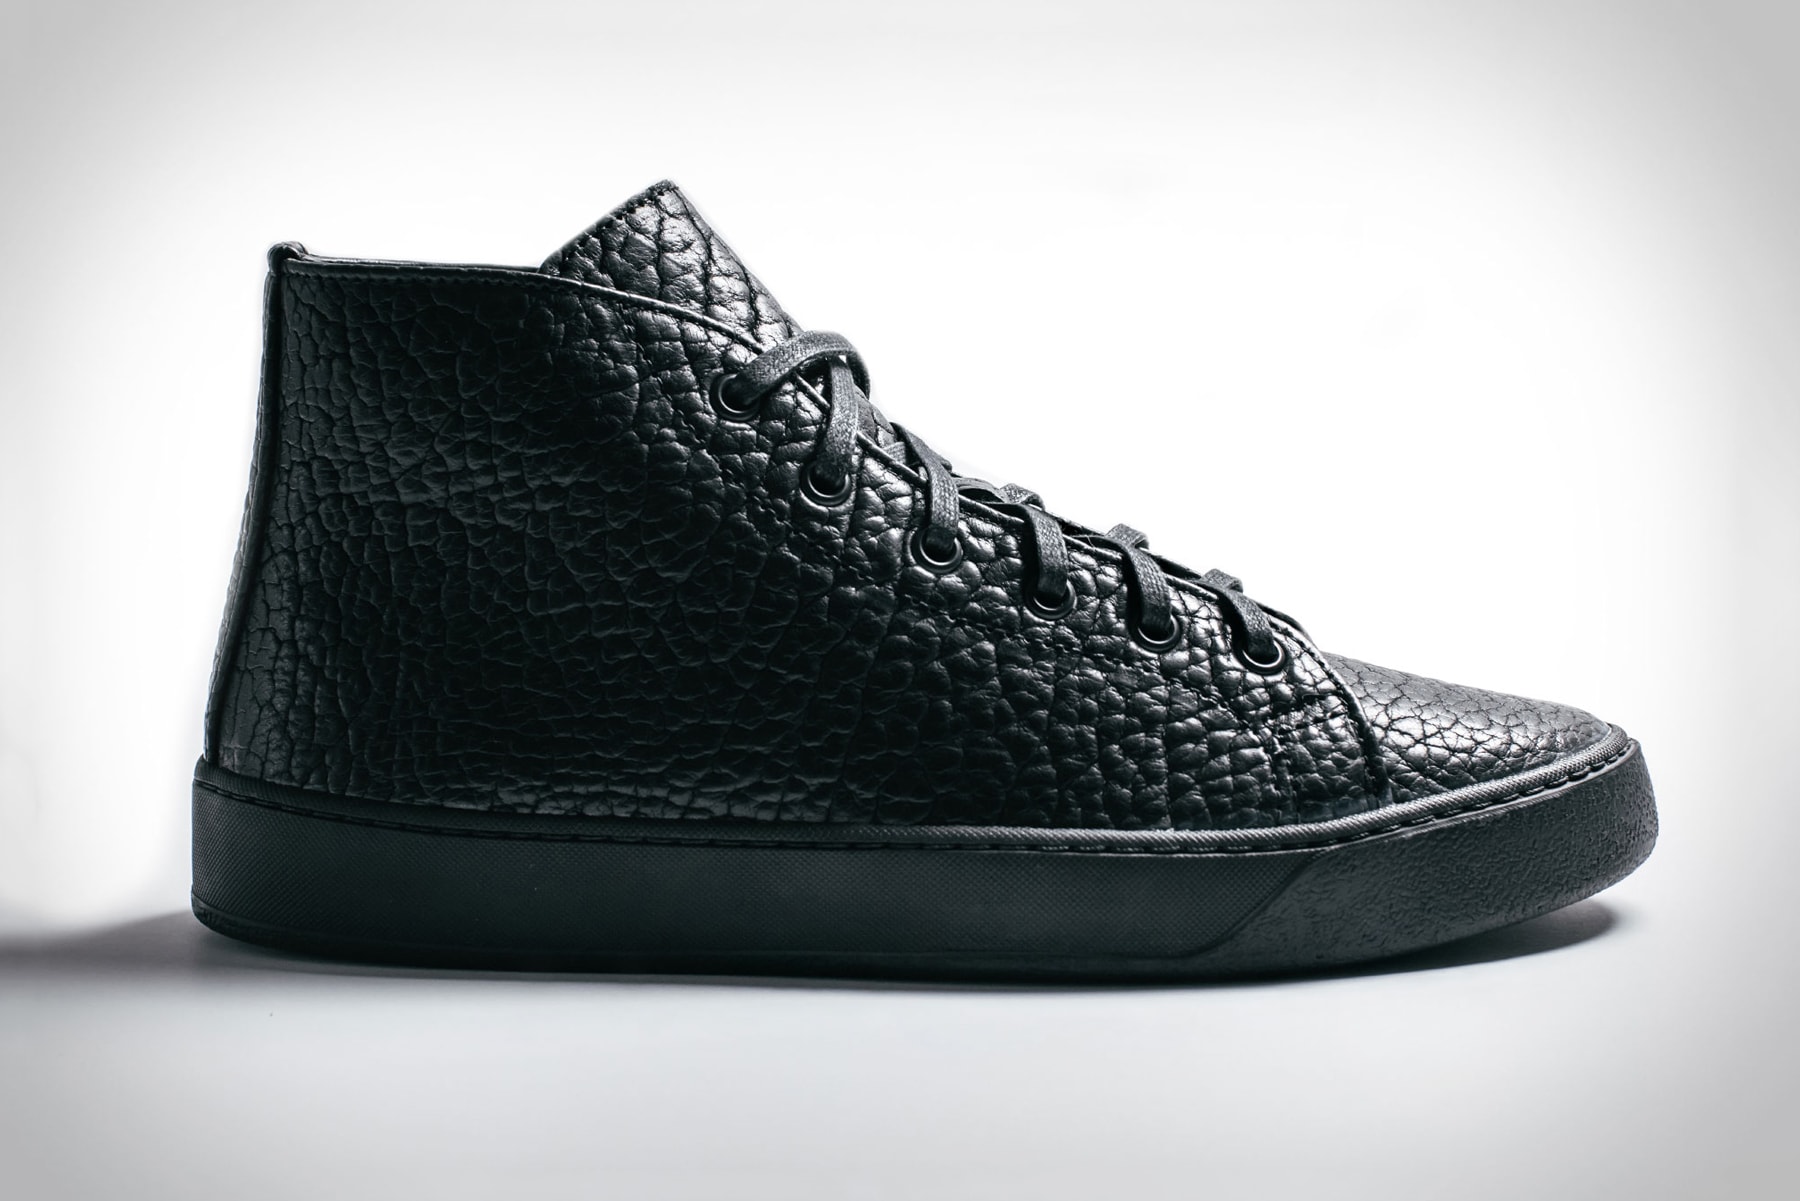 Rancourt & Co. Uncrate Court Classic Sneaker Black Leather